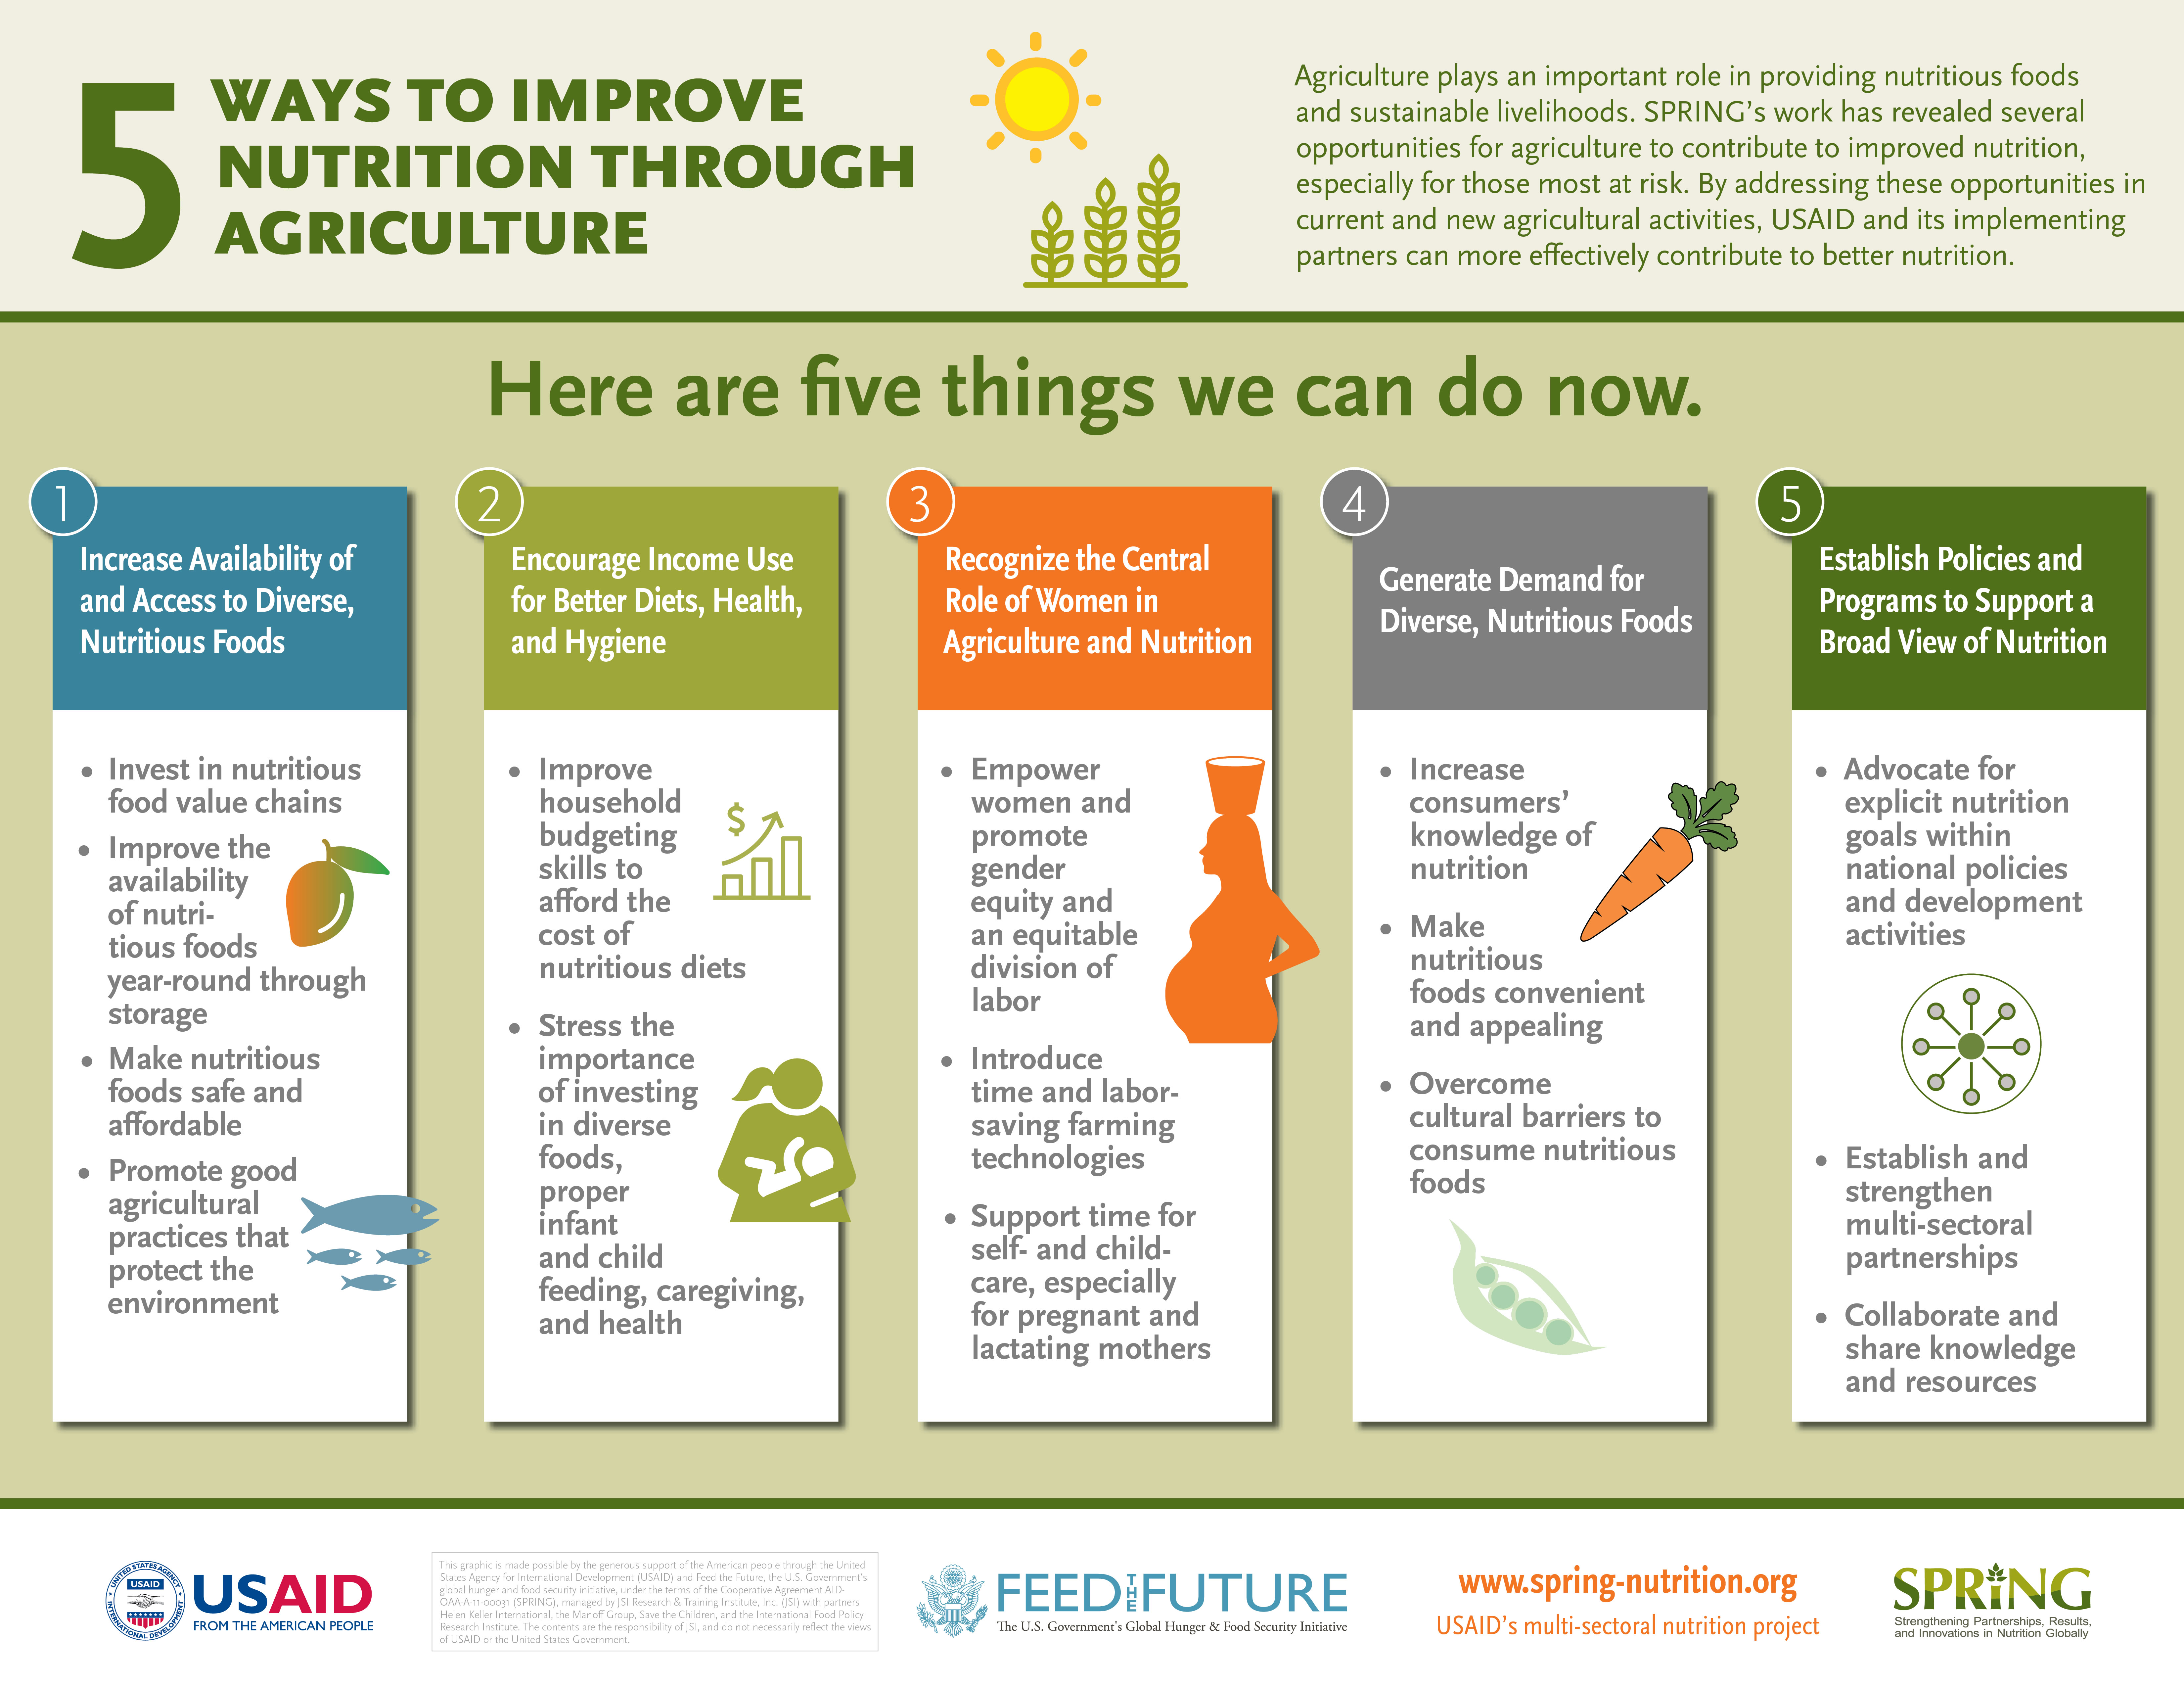 Five Ways to Improve Nutrition Through Agriculture | SPRING